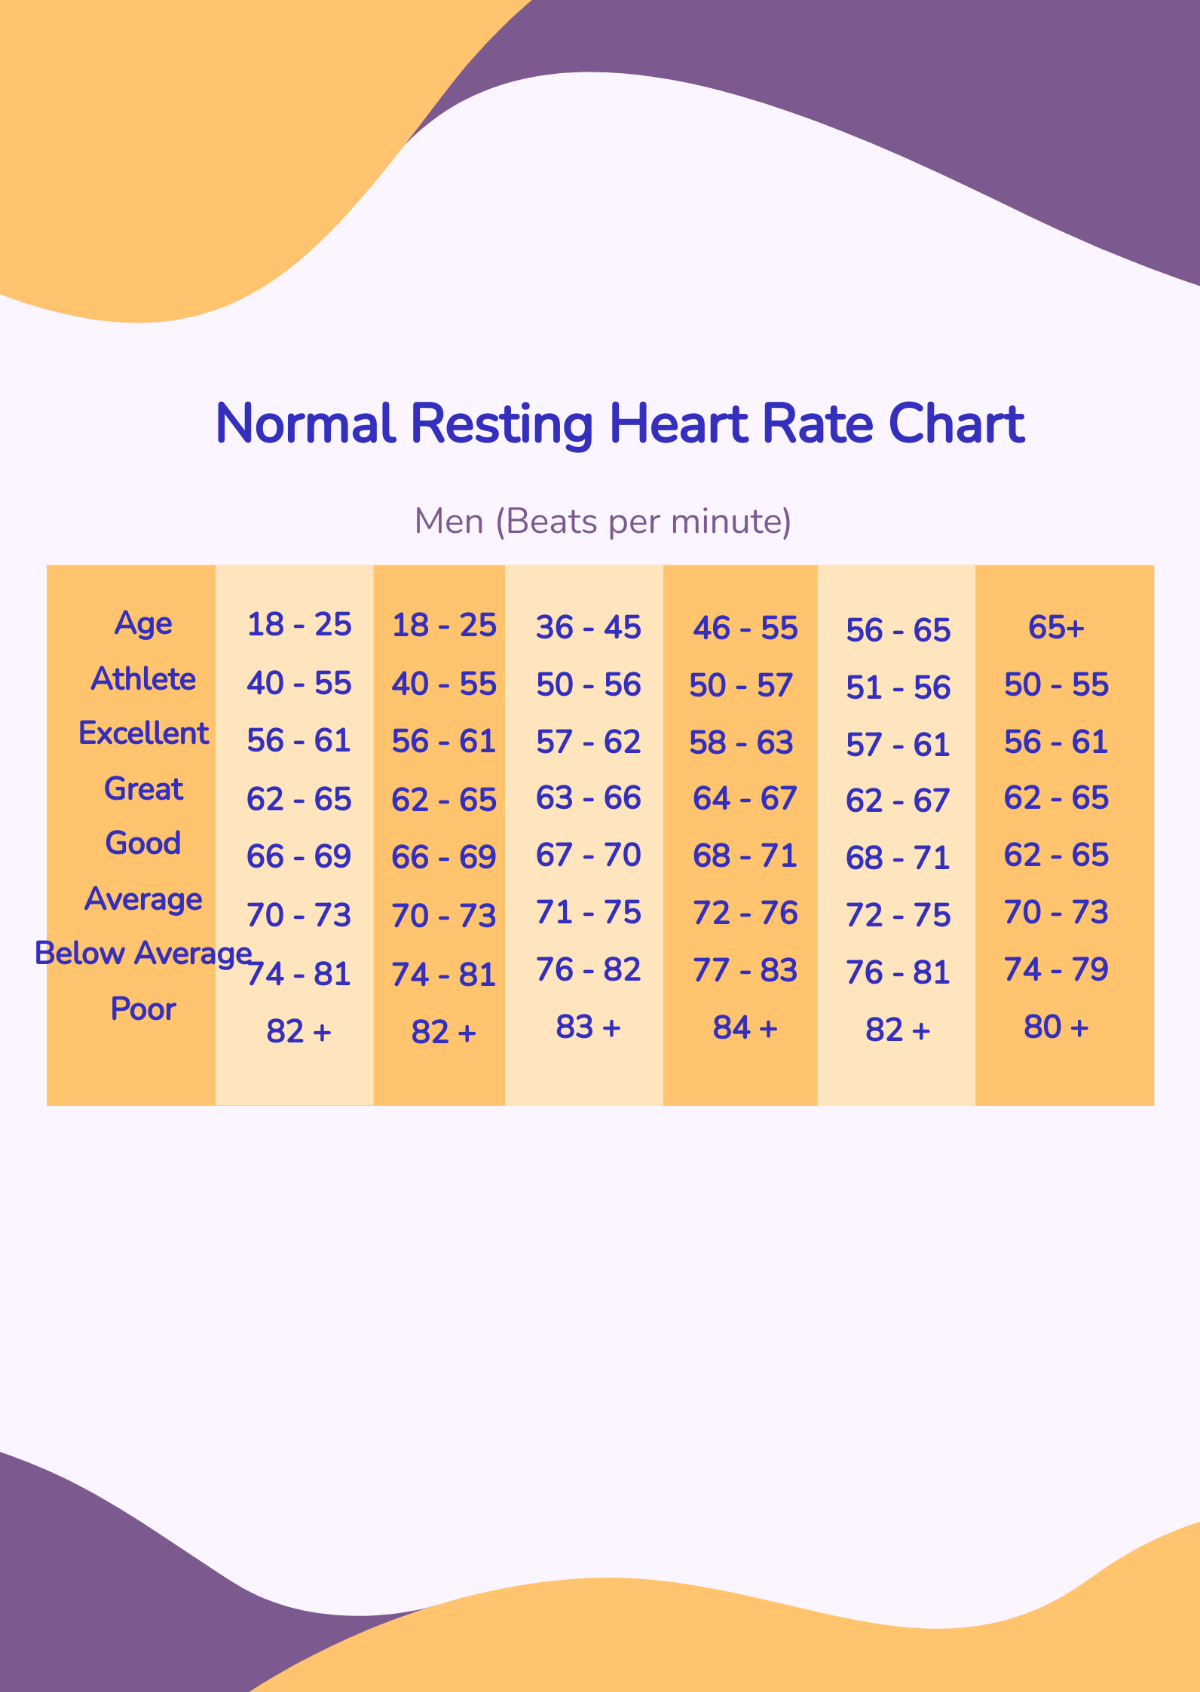 Normal Resting Heart Rate Chart Template